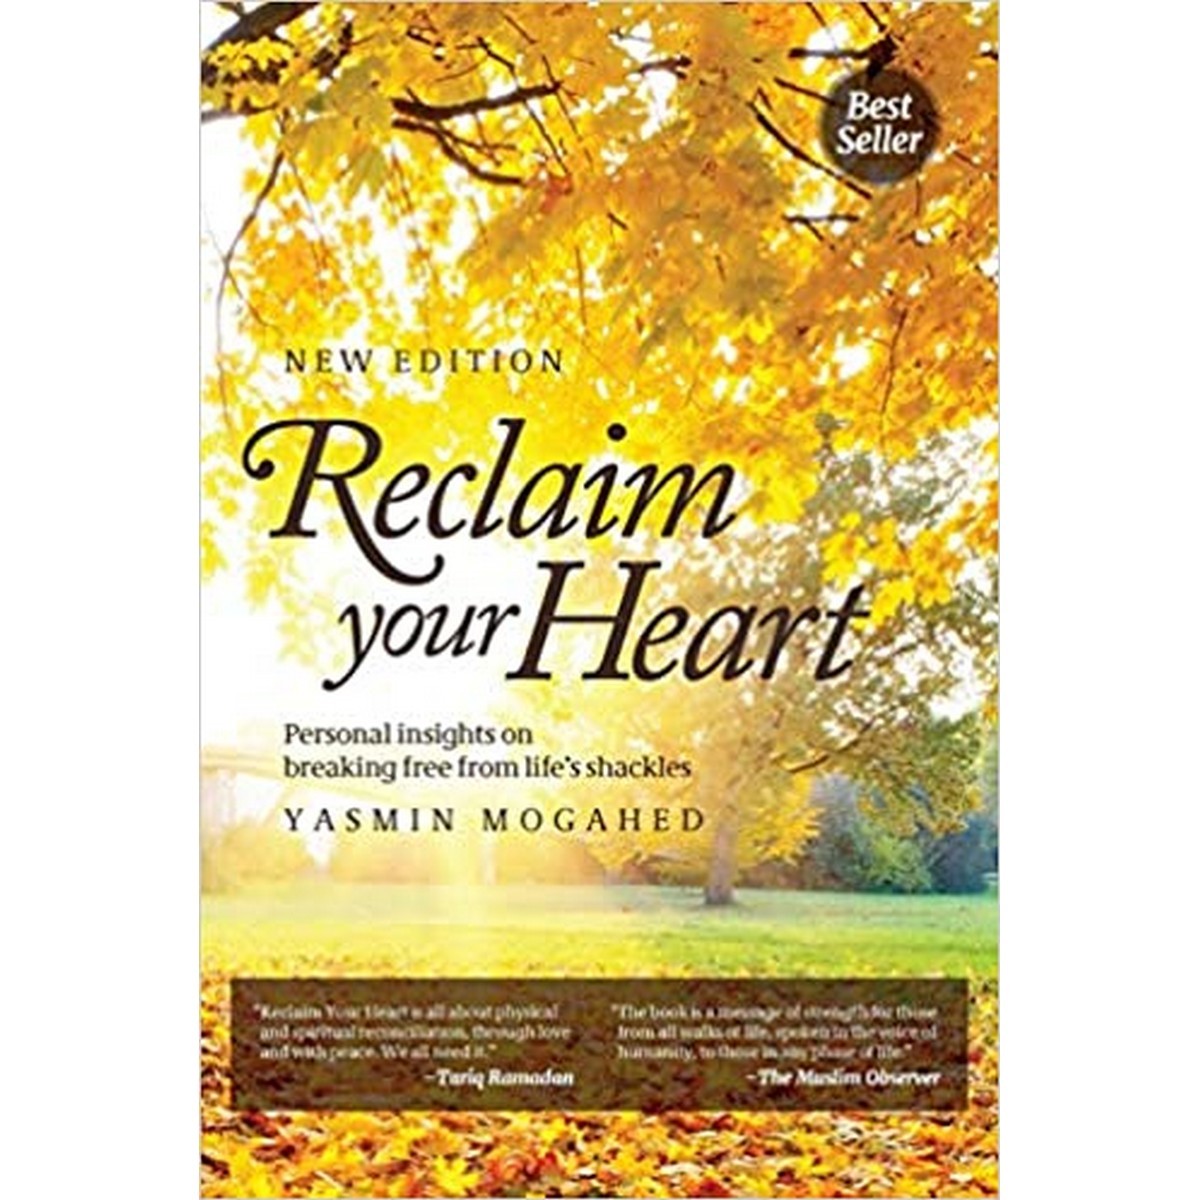 Reclaim Your Heart by Yasmin Mogahed ( Yasmeen Mogahed ) (book)